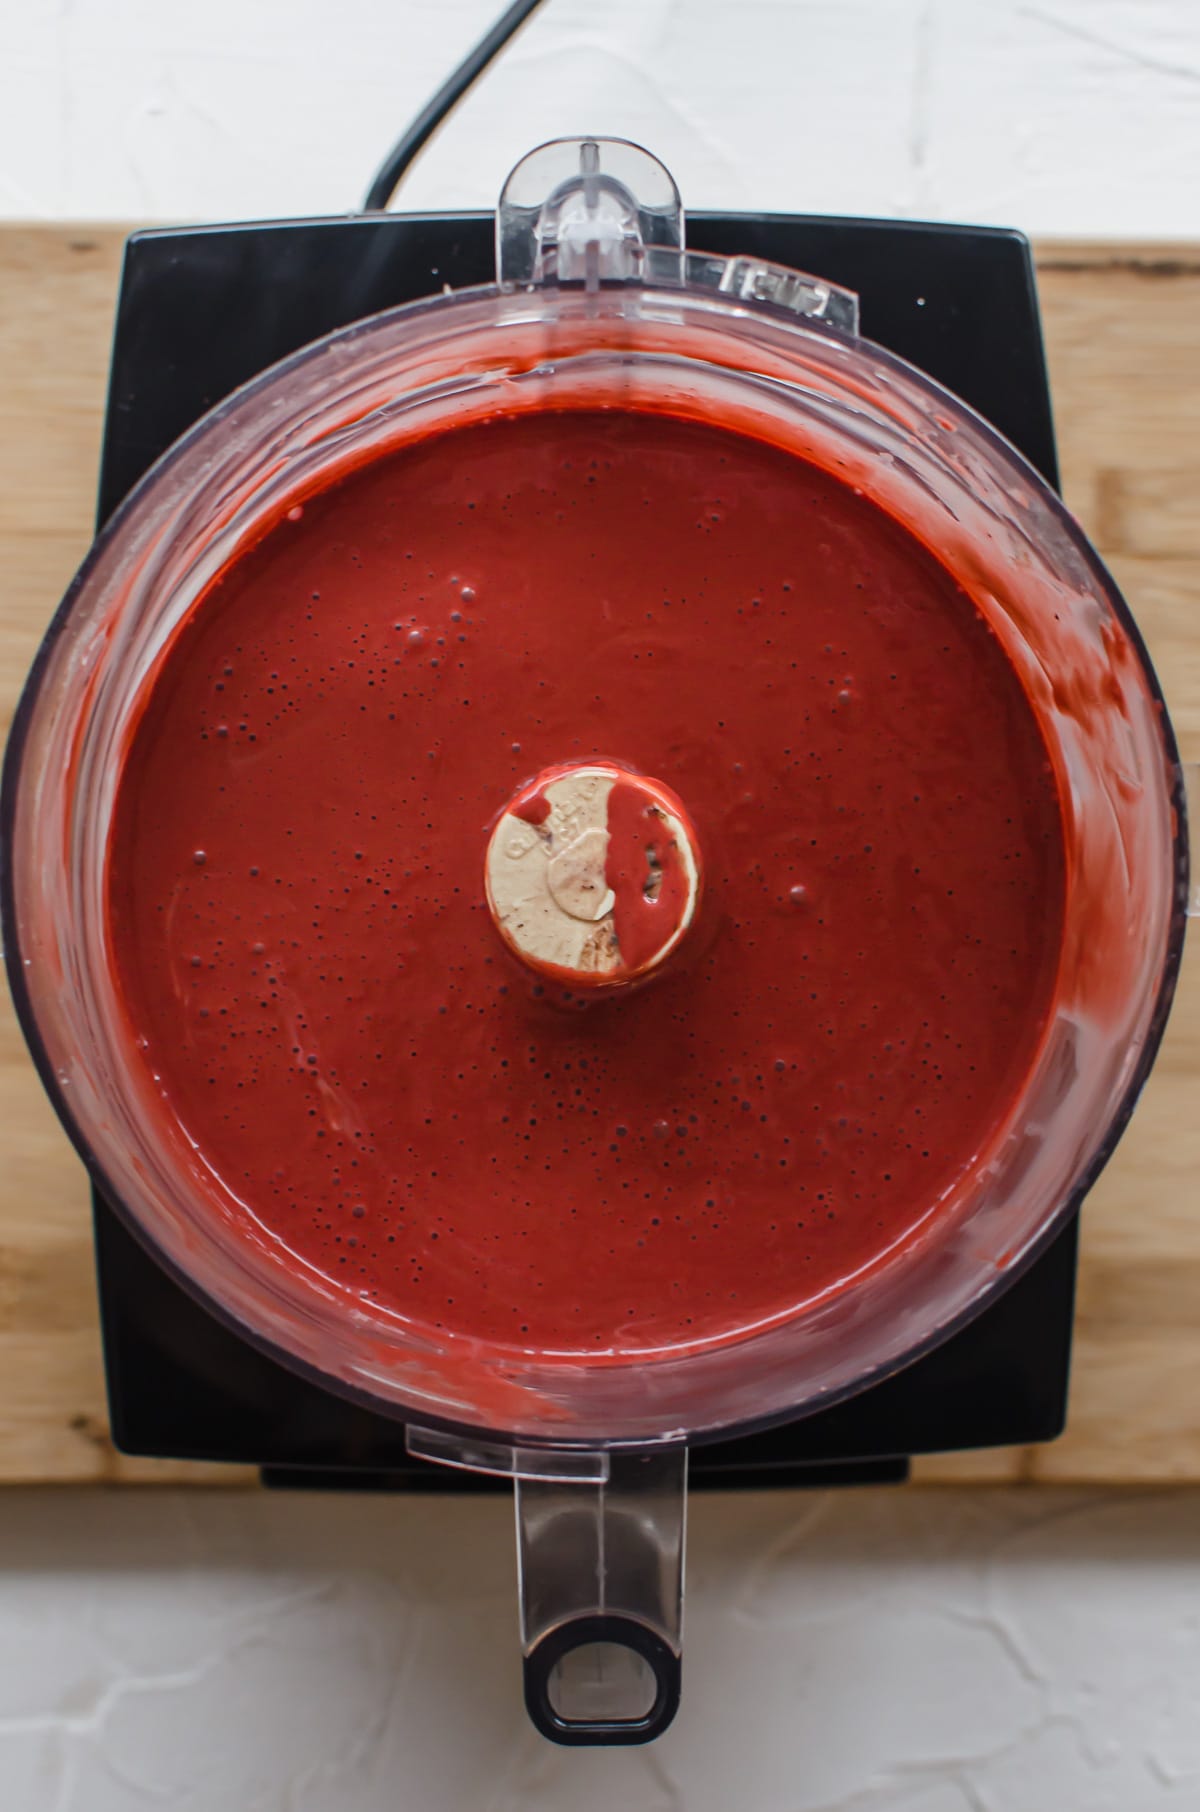 Red velvet cheesecake batter in the bowl of a food processor.